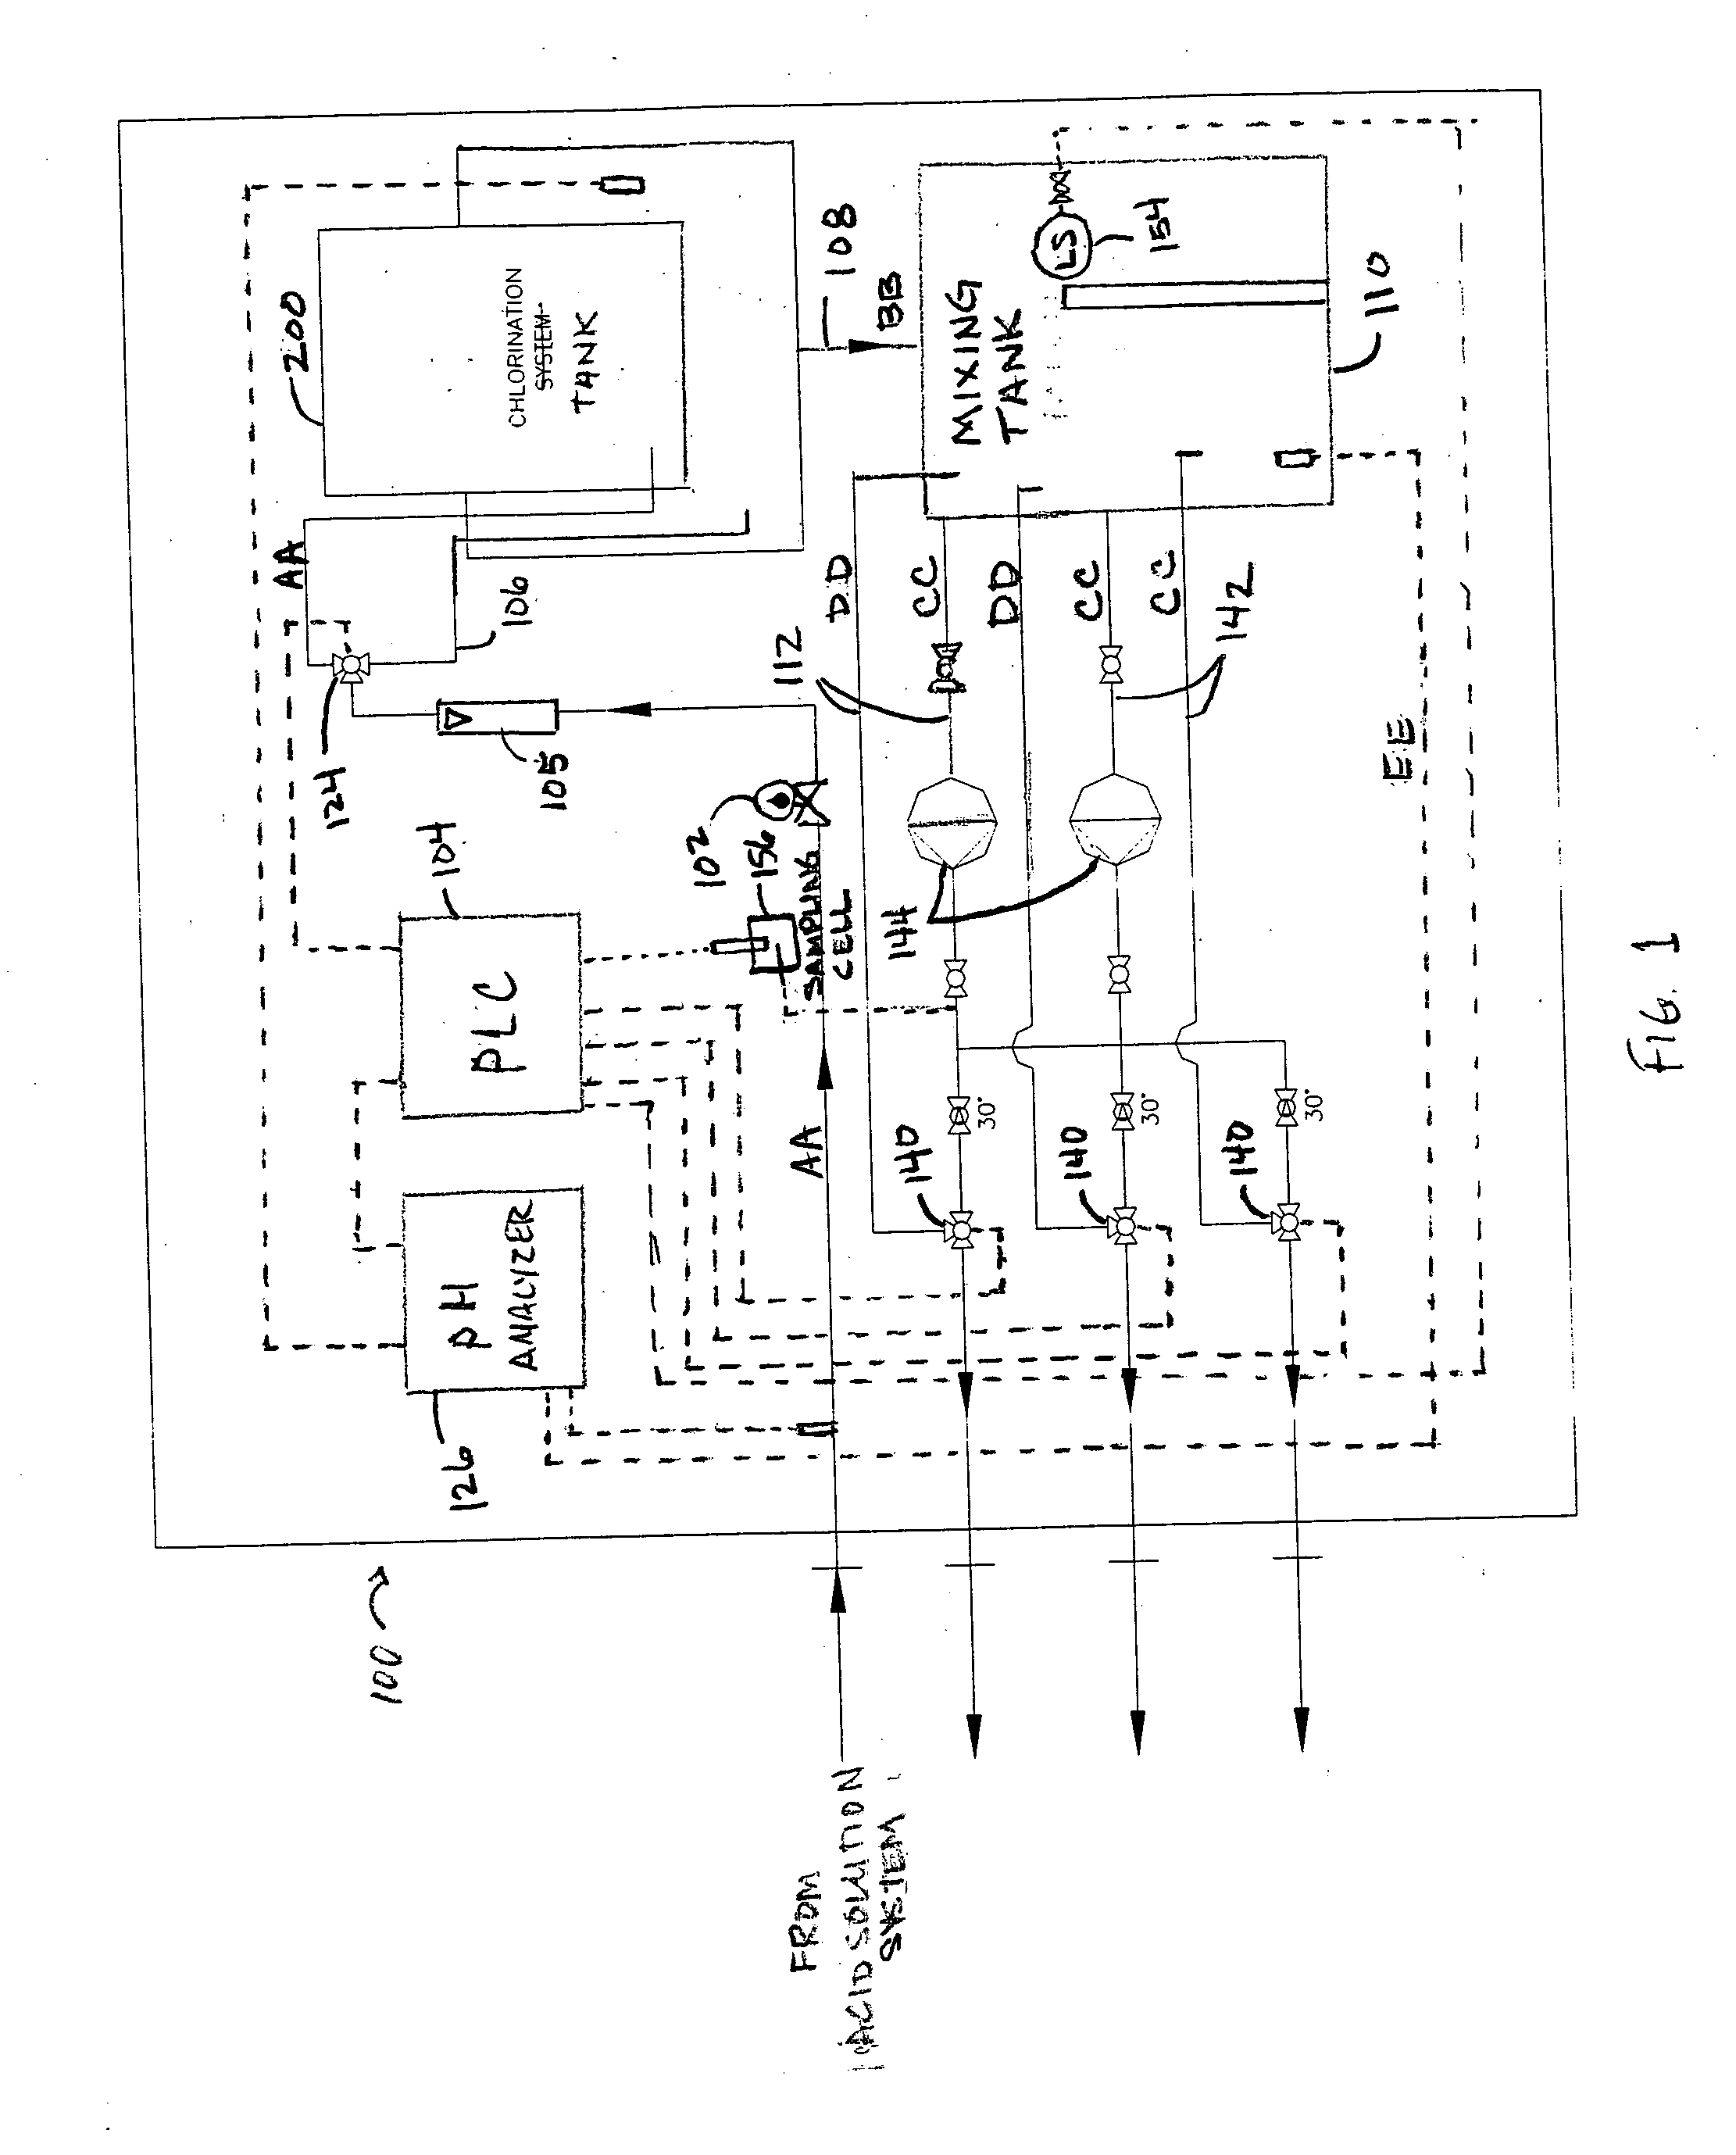 Systems and methods for reducing carbonates in a chlorination system